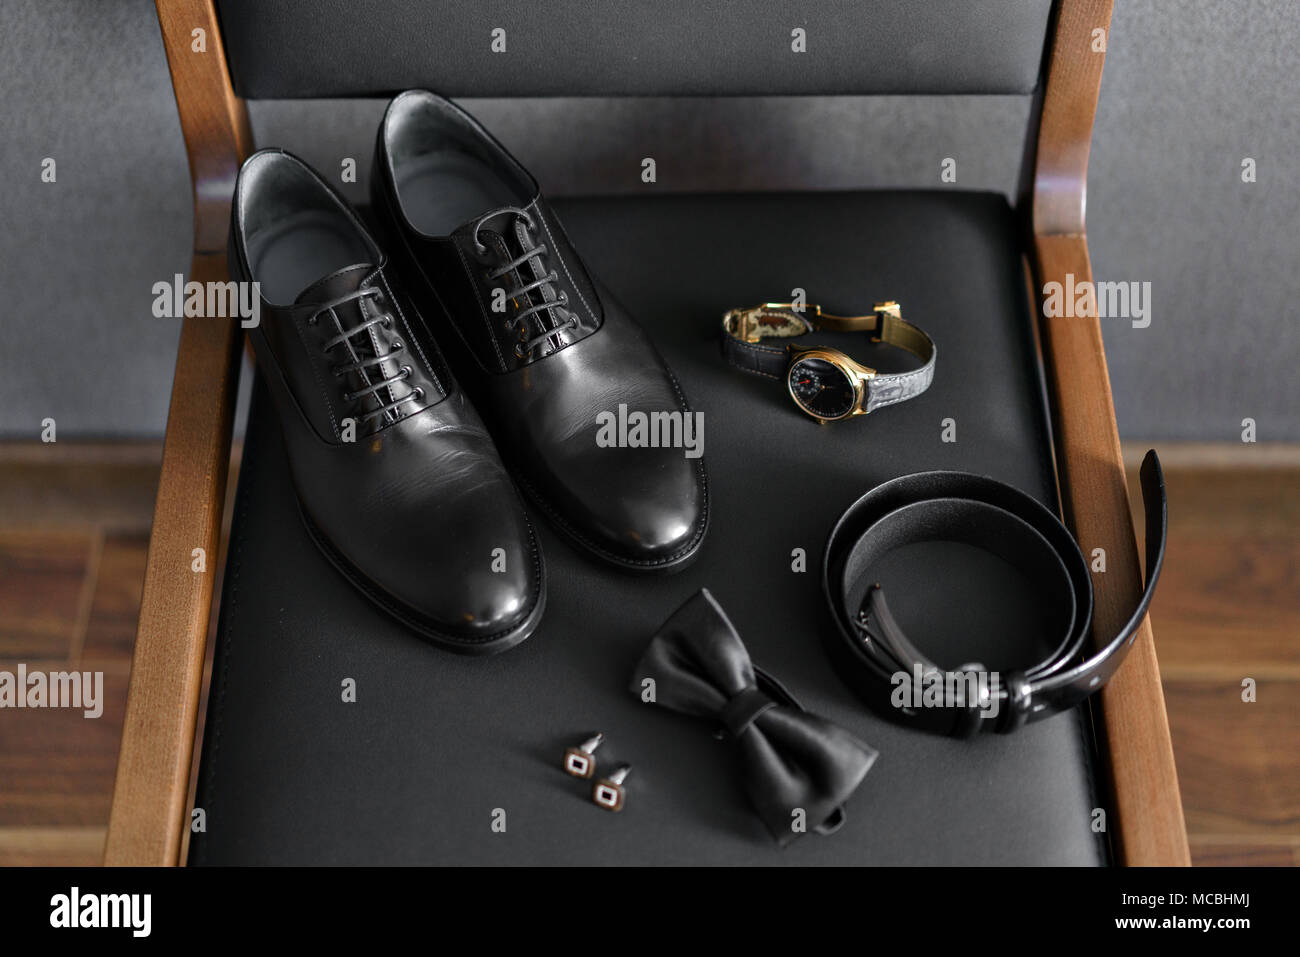 Set of Mans Fashion Clothing and Business Accessories Stock Photo